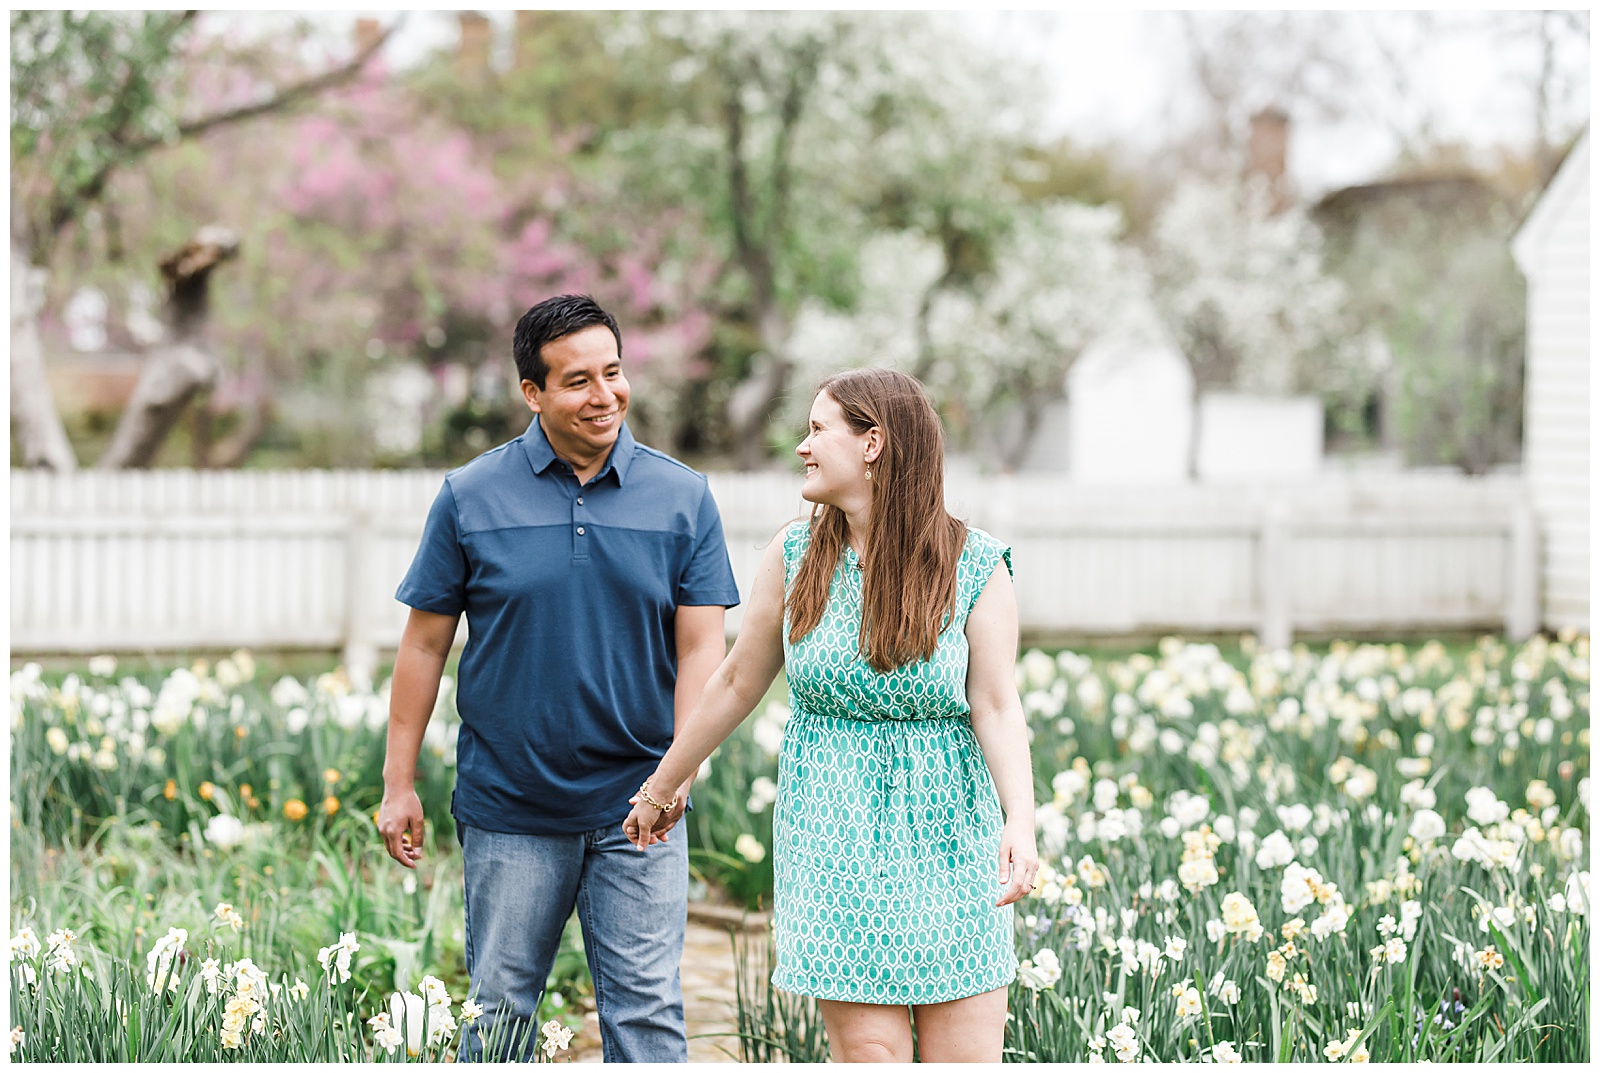 spring colonial williamsburg engagement session virginia wedding photographer fredericks photo and films